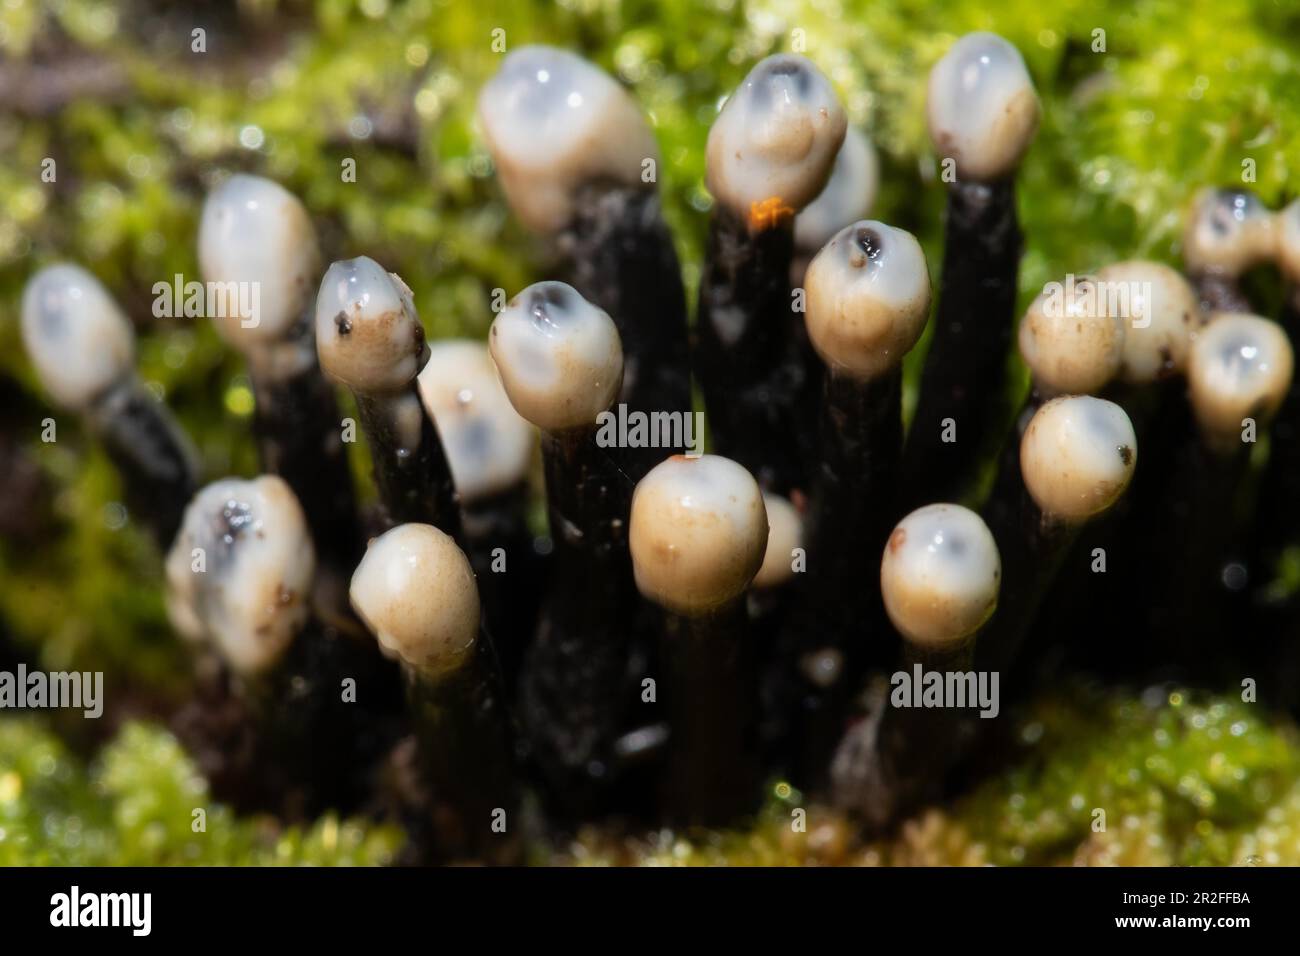 Conidia black cup secondary fruiting form several black rough stems and egg-shaped milk-white heads next to each other in green moss Stock Photo